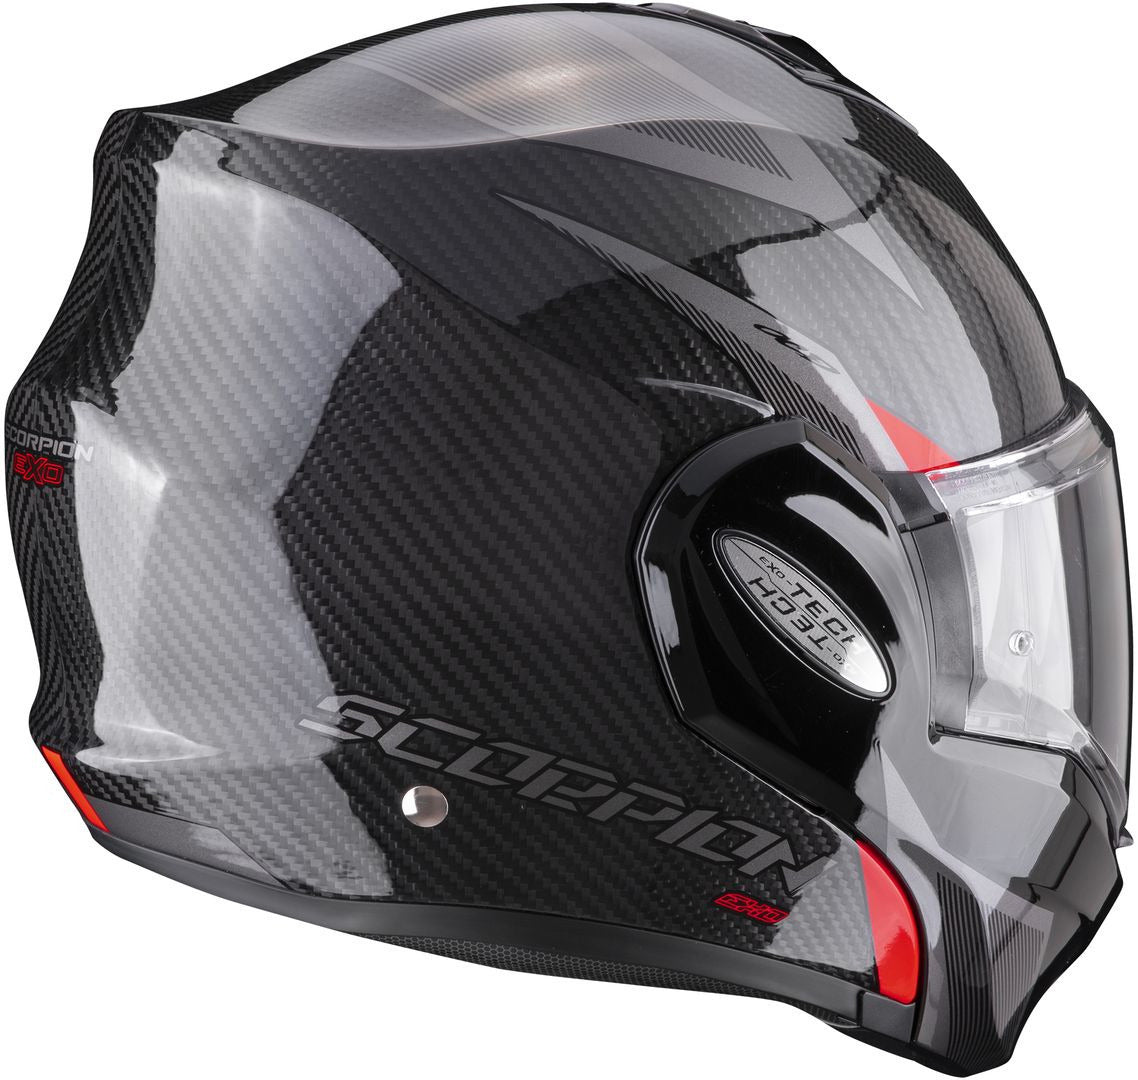 Buy Scorpion EXO-Tech Carbon Top Helmet Online with Free Shipping –  superbikestore